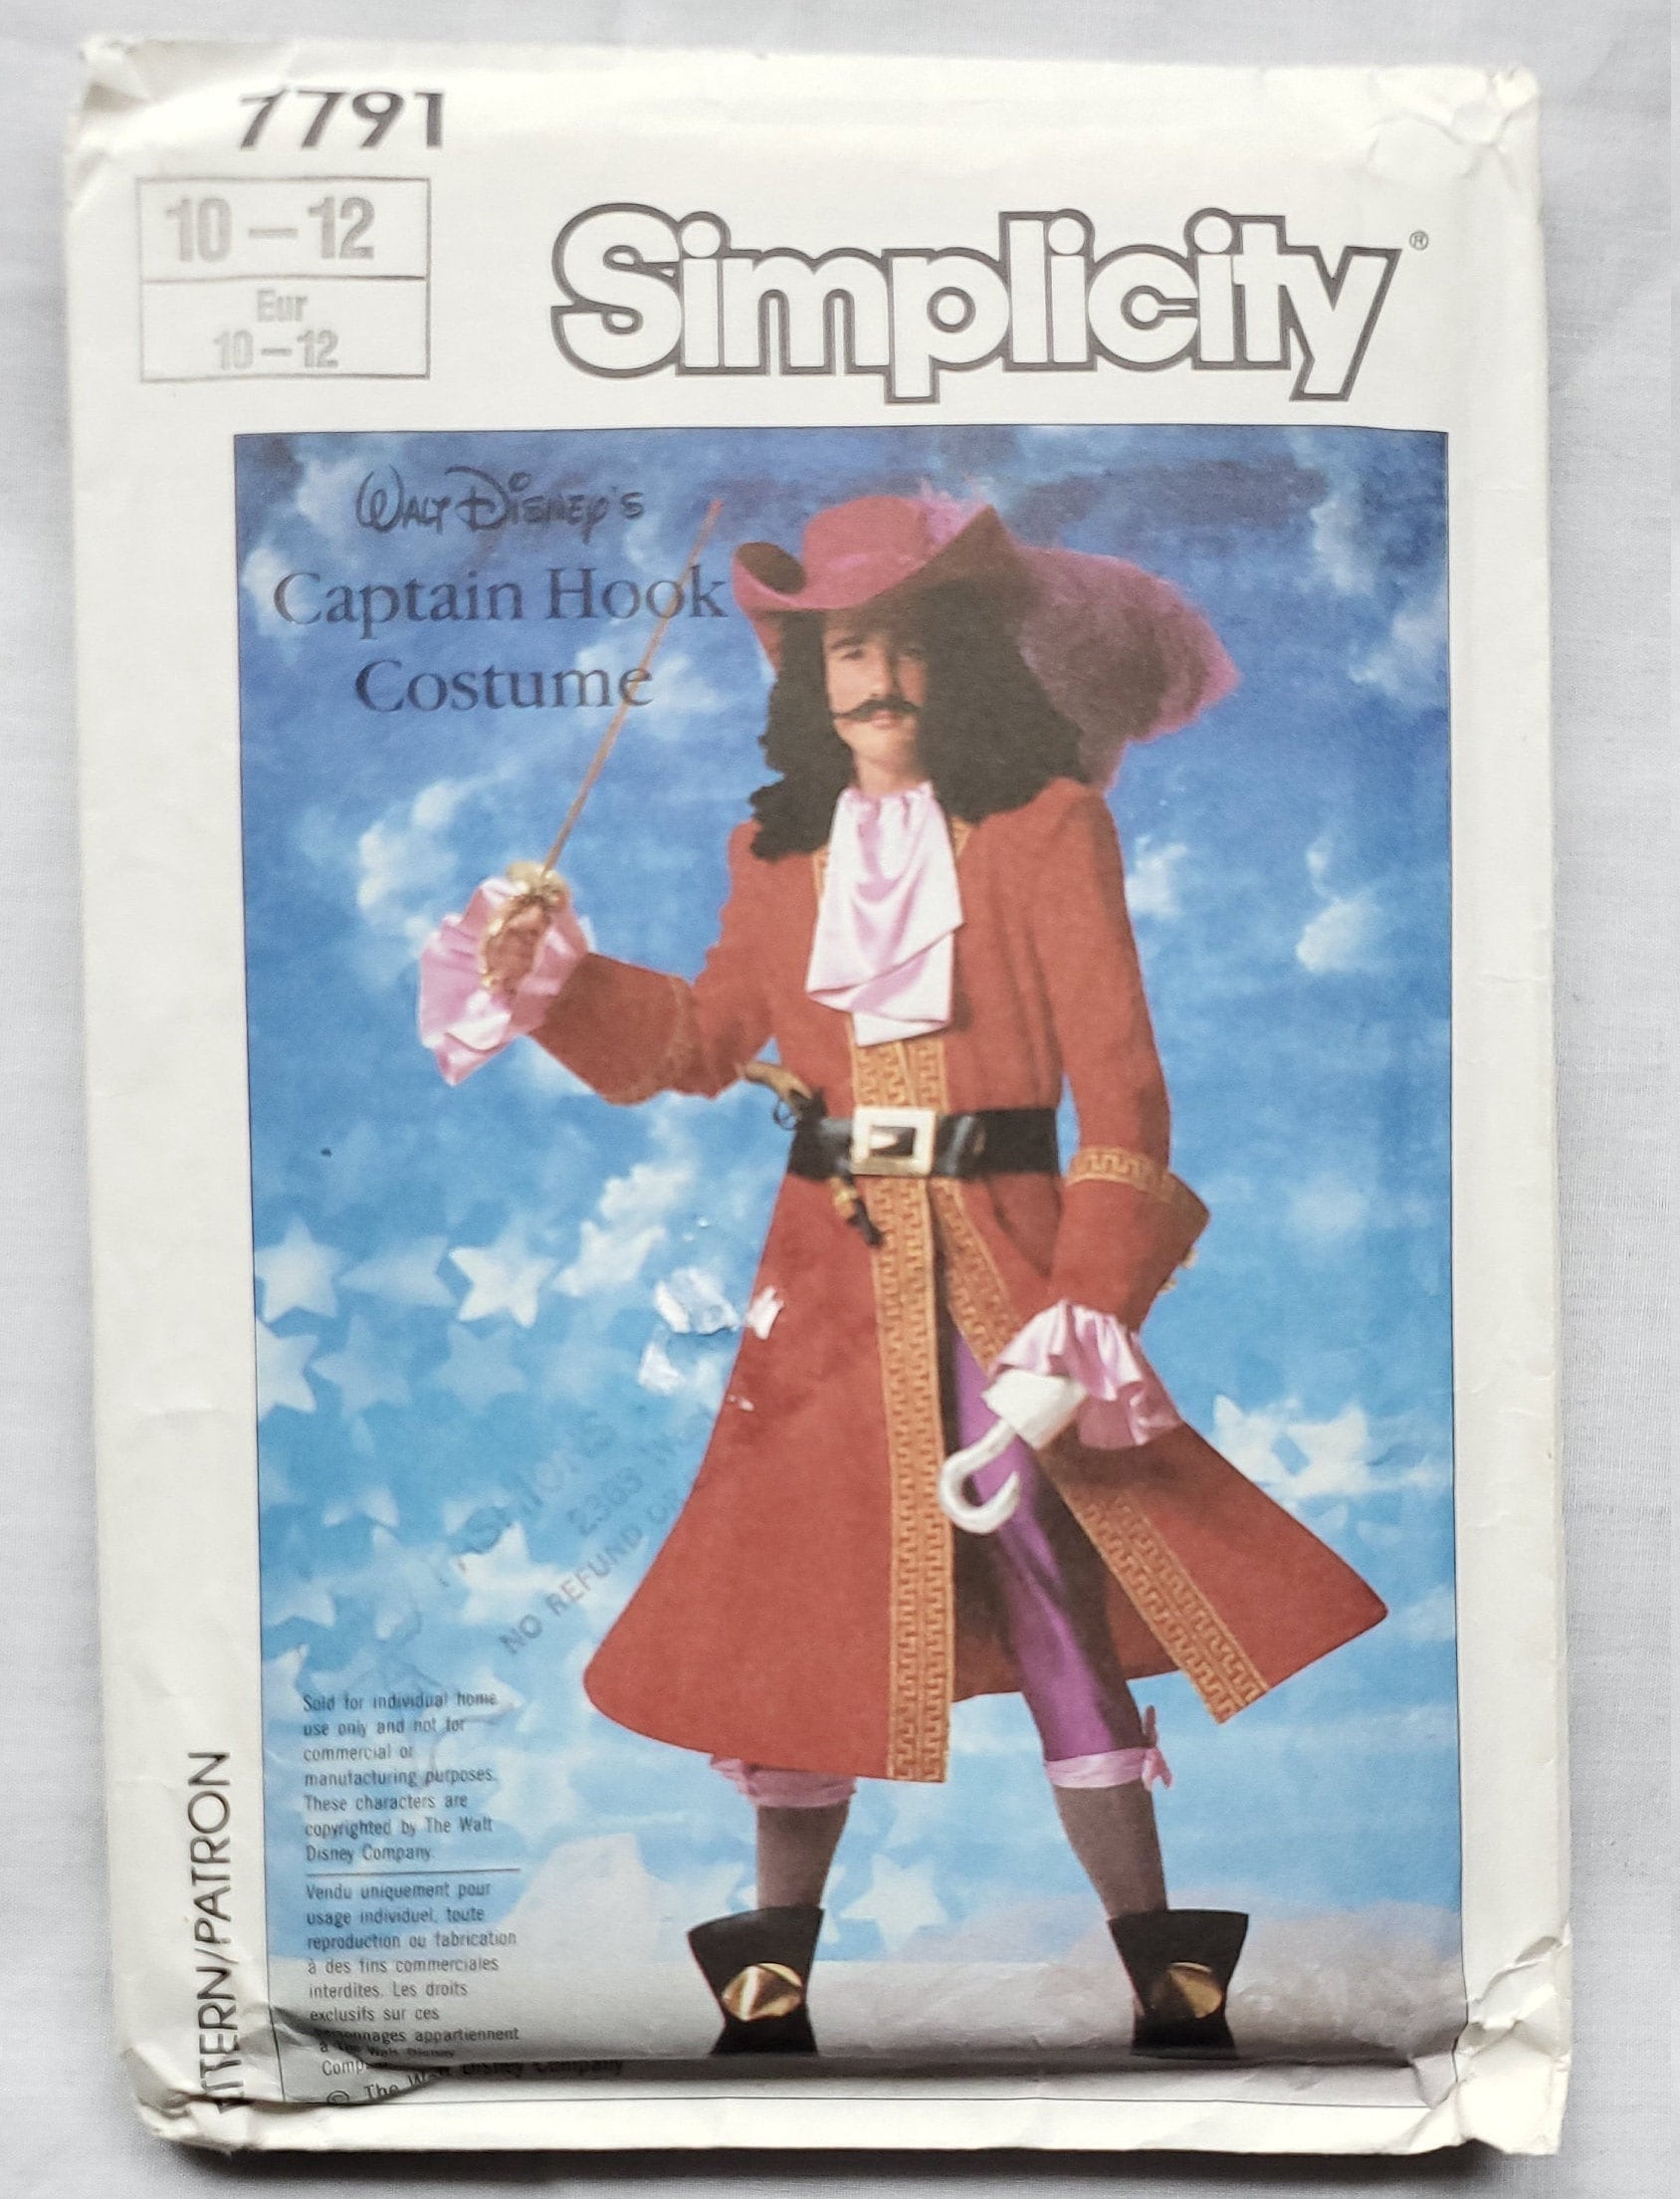 Captain Hook Costume Teen or Tween Costume Sewing Pattern Size 10-12 Chest  28.5-30 Simplicity 7791 G 